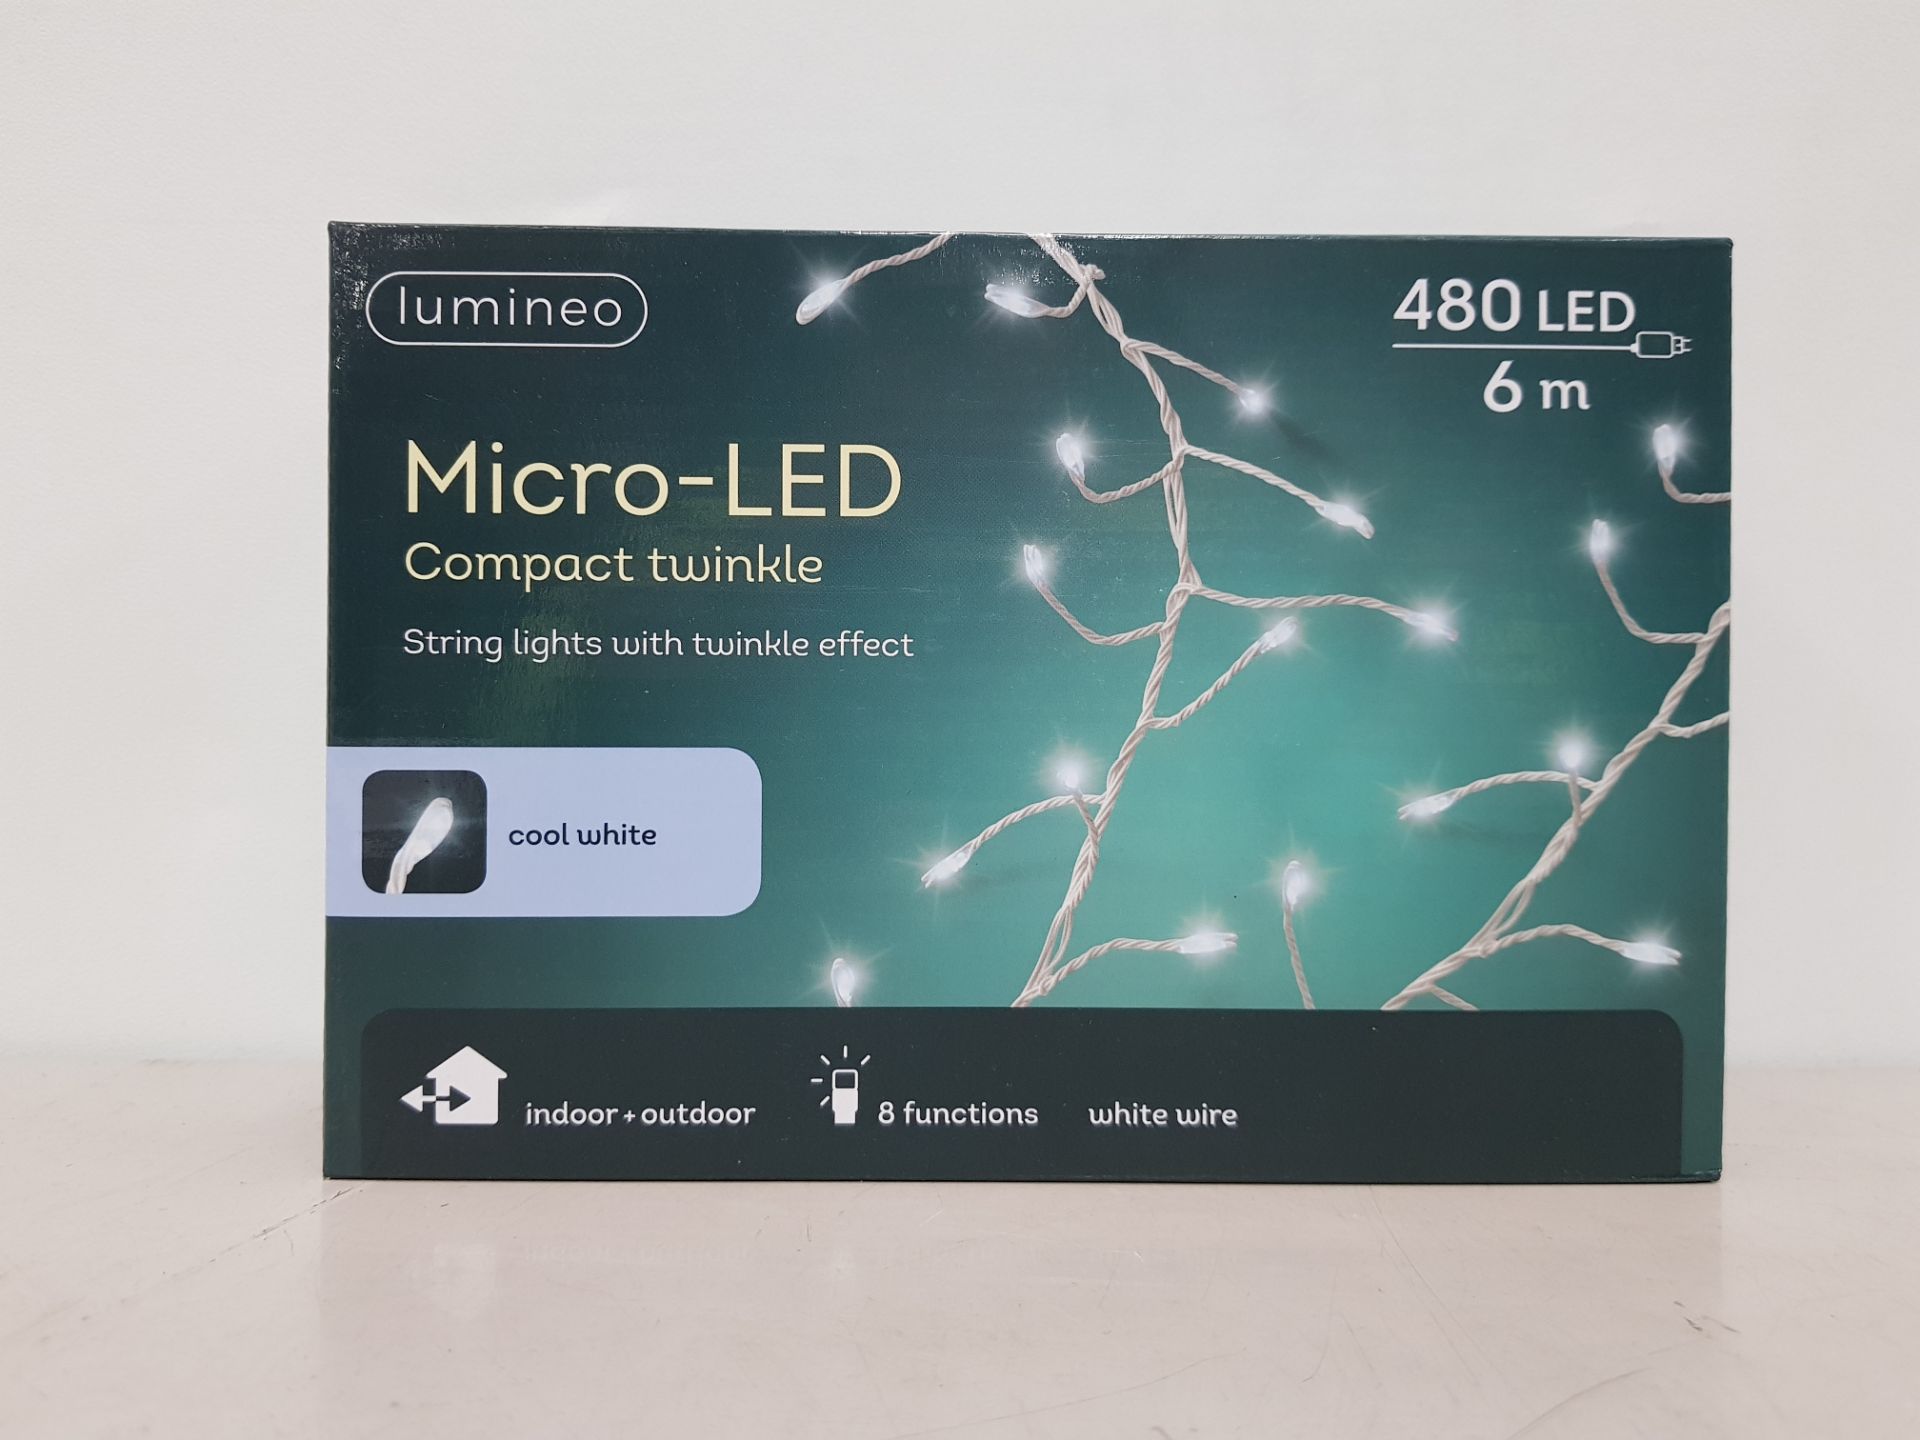 10 X BRAND NEW LUMINEO MICRO-LED 480 LED COMPACT TWINKLE LIGHTS IN COOL WHITE - 6M LENGTH